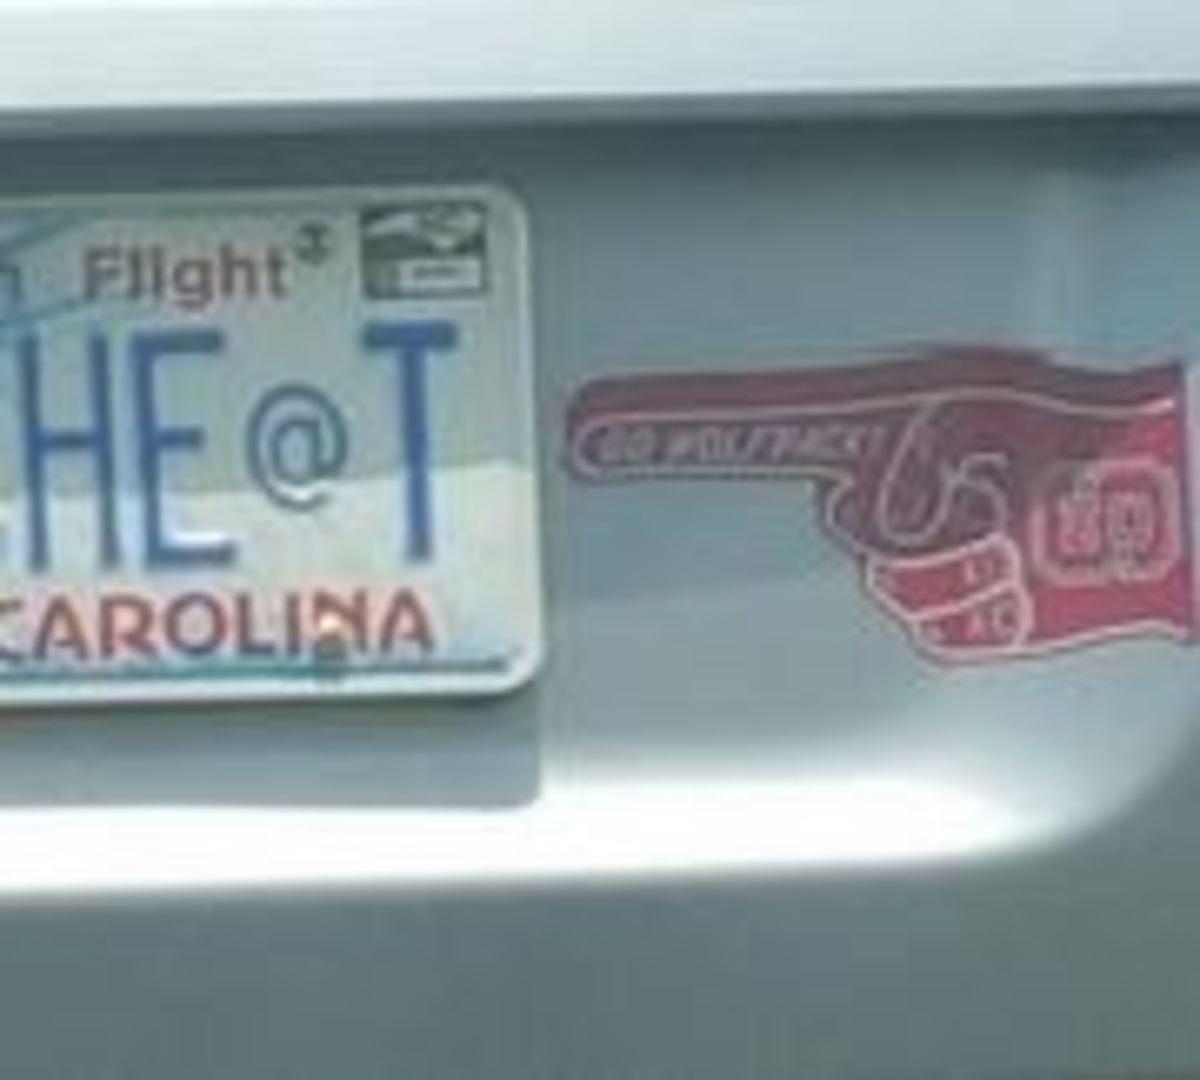 NC Stae finger bumper sticker pointing at a UNC cheats license plate.